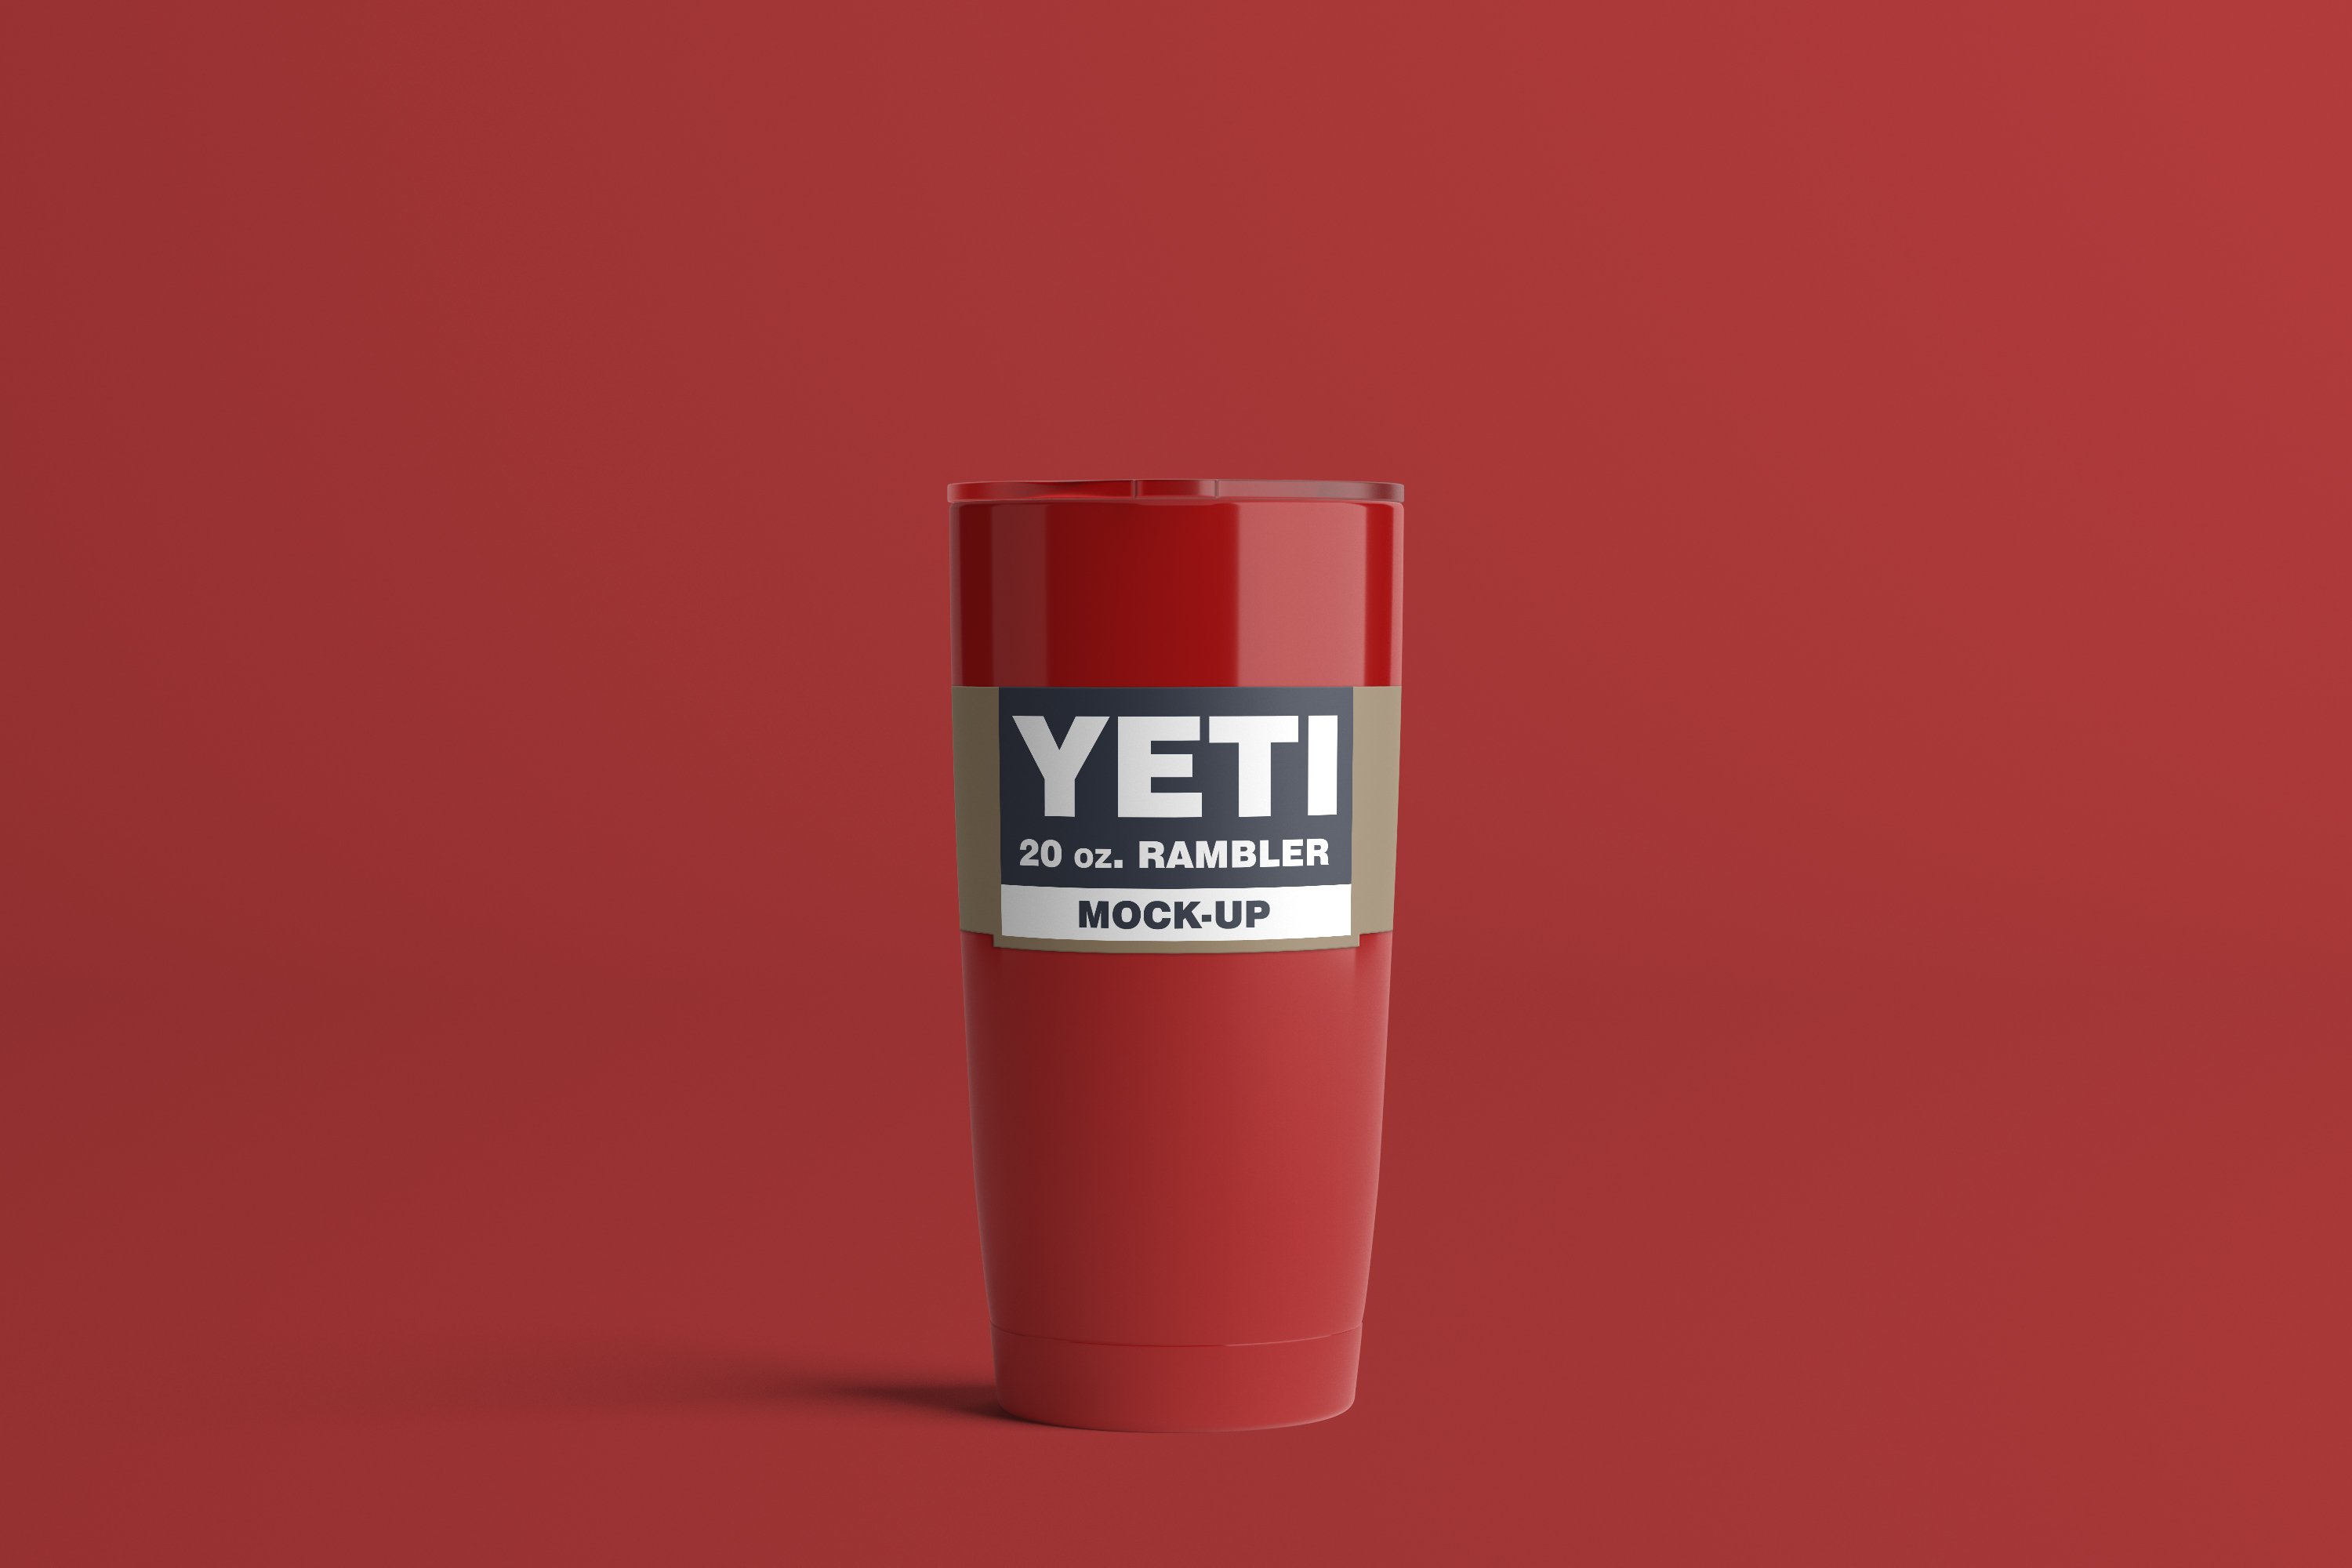 Classic red yeti cup.